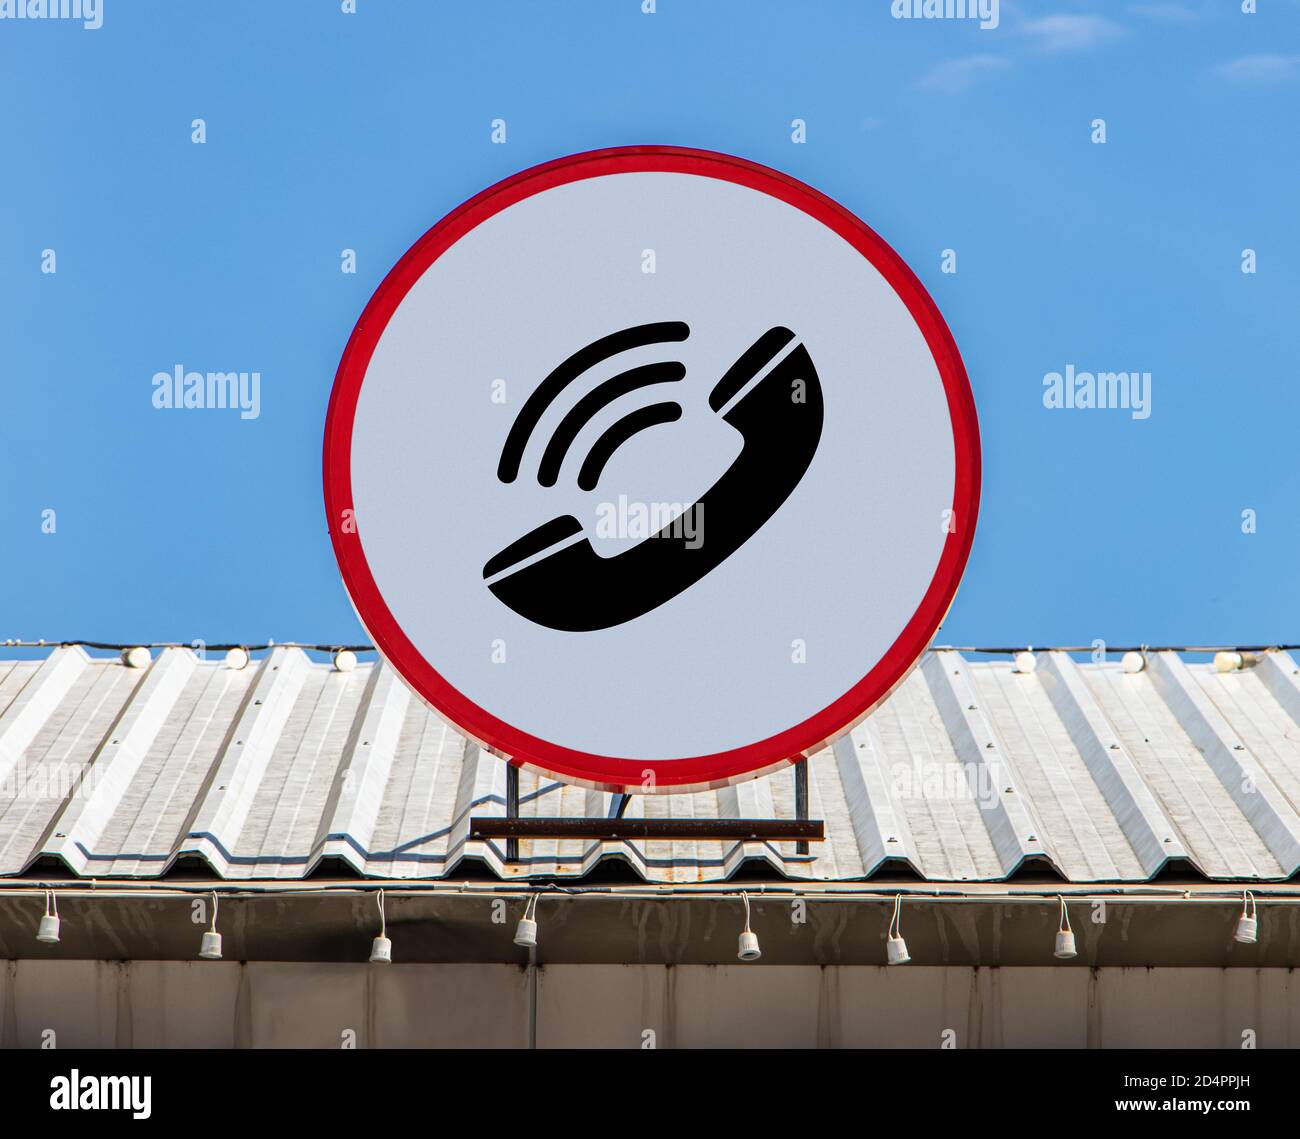 A Circle billboard with icon a calls phone, is installed on a roof. Board of telecommunication service. Stock Photo